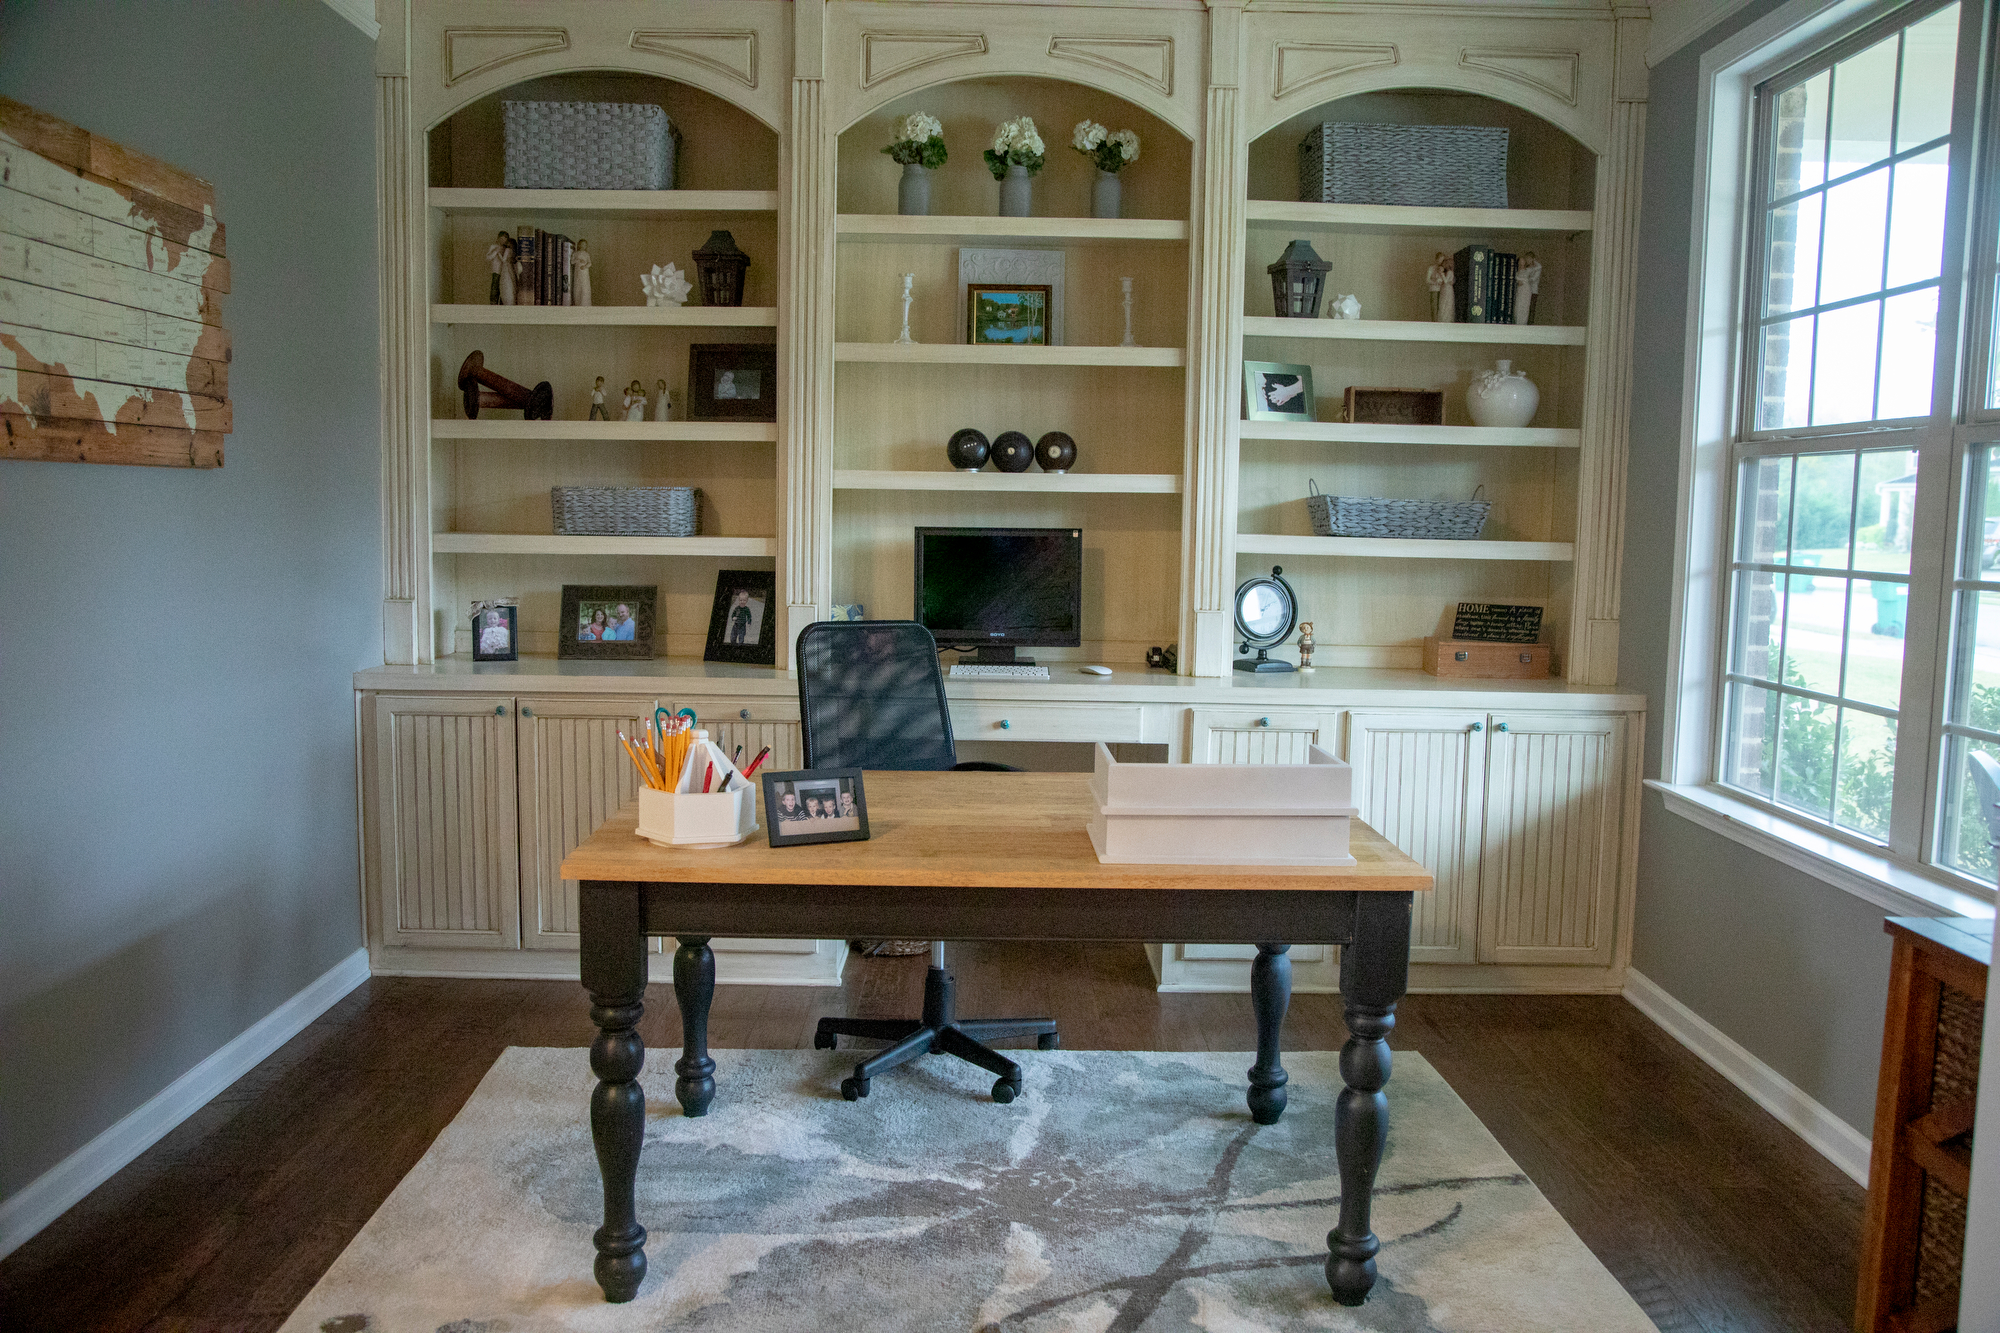 Homes in Atlanta: Right at-home office can maximize comfort